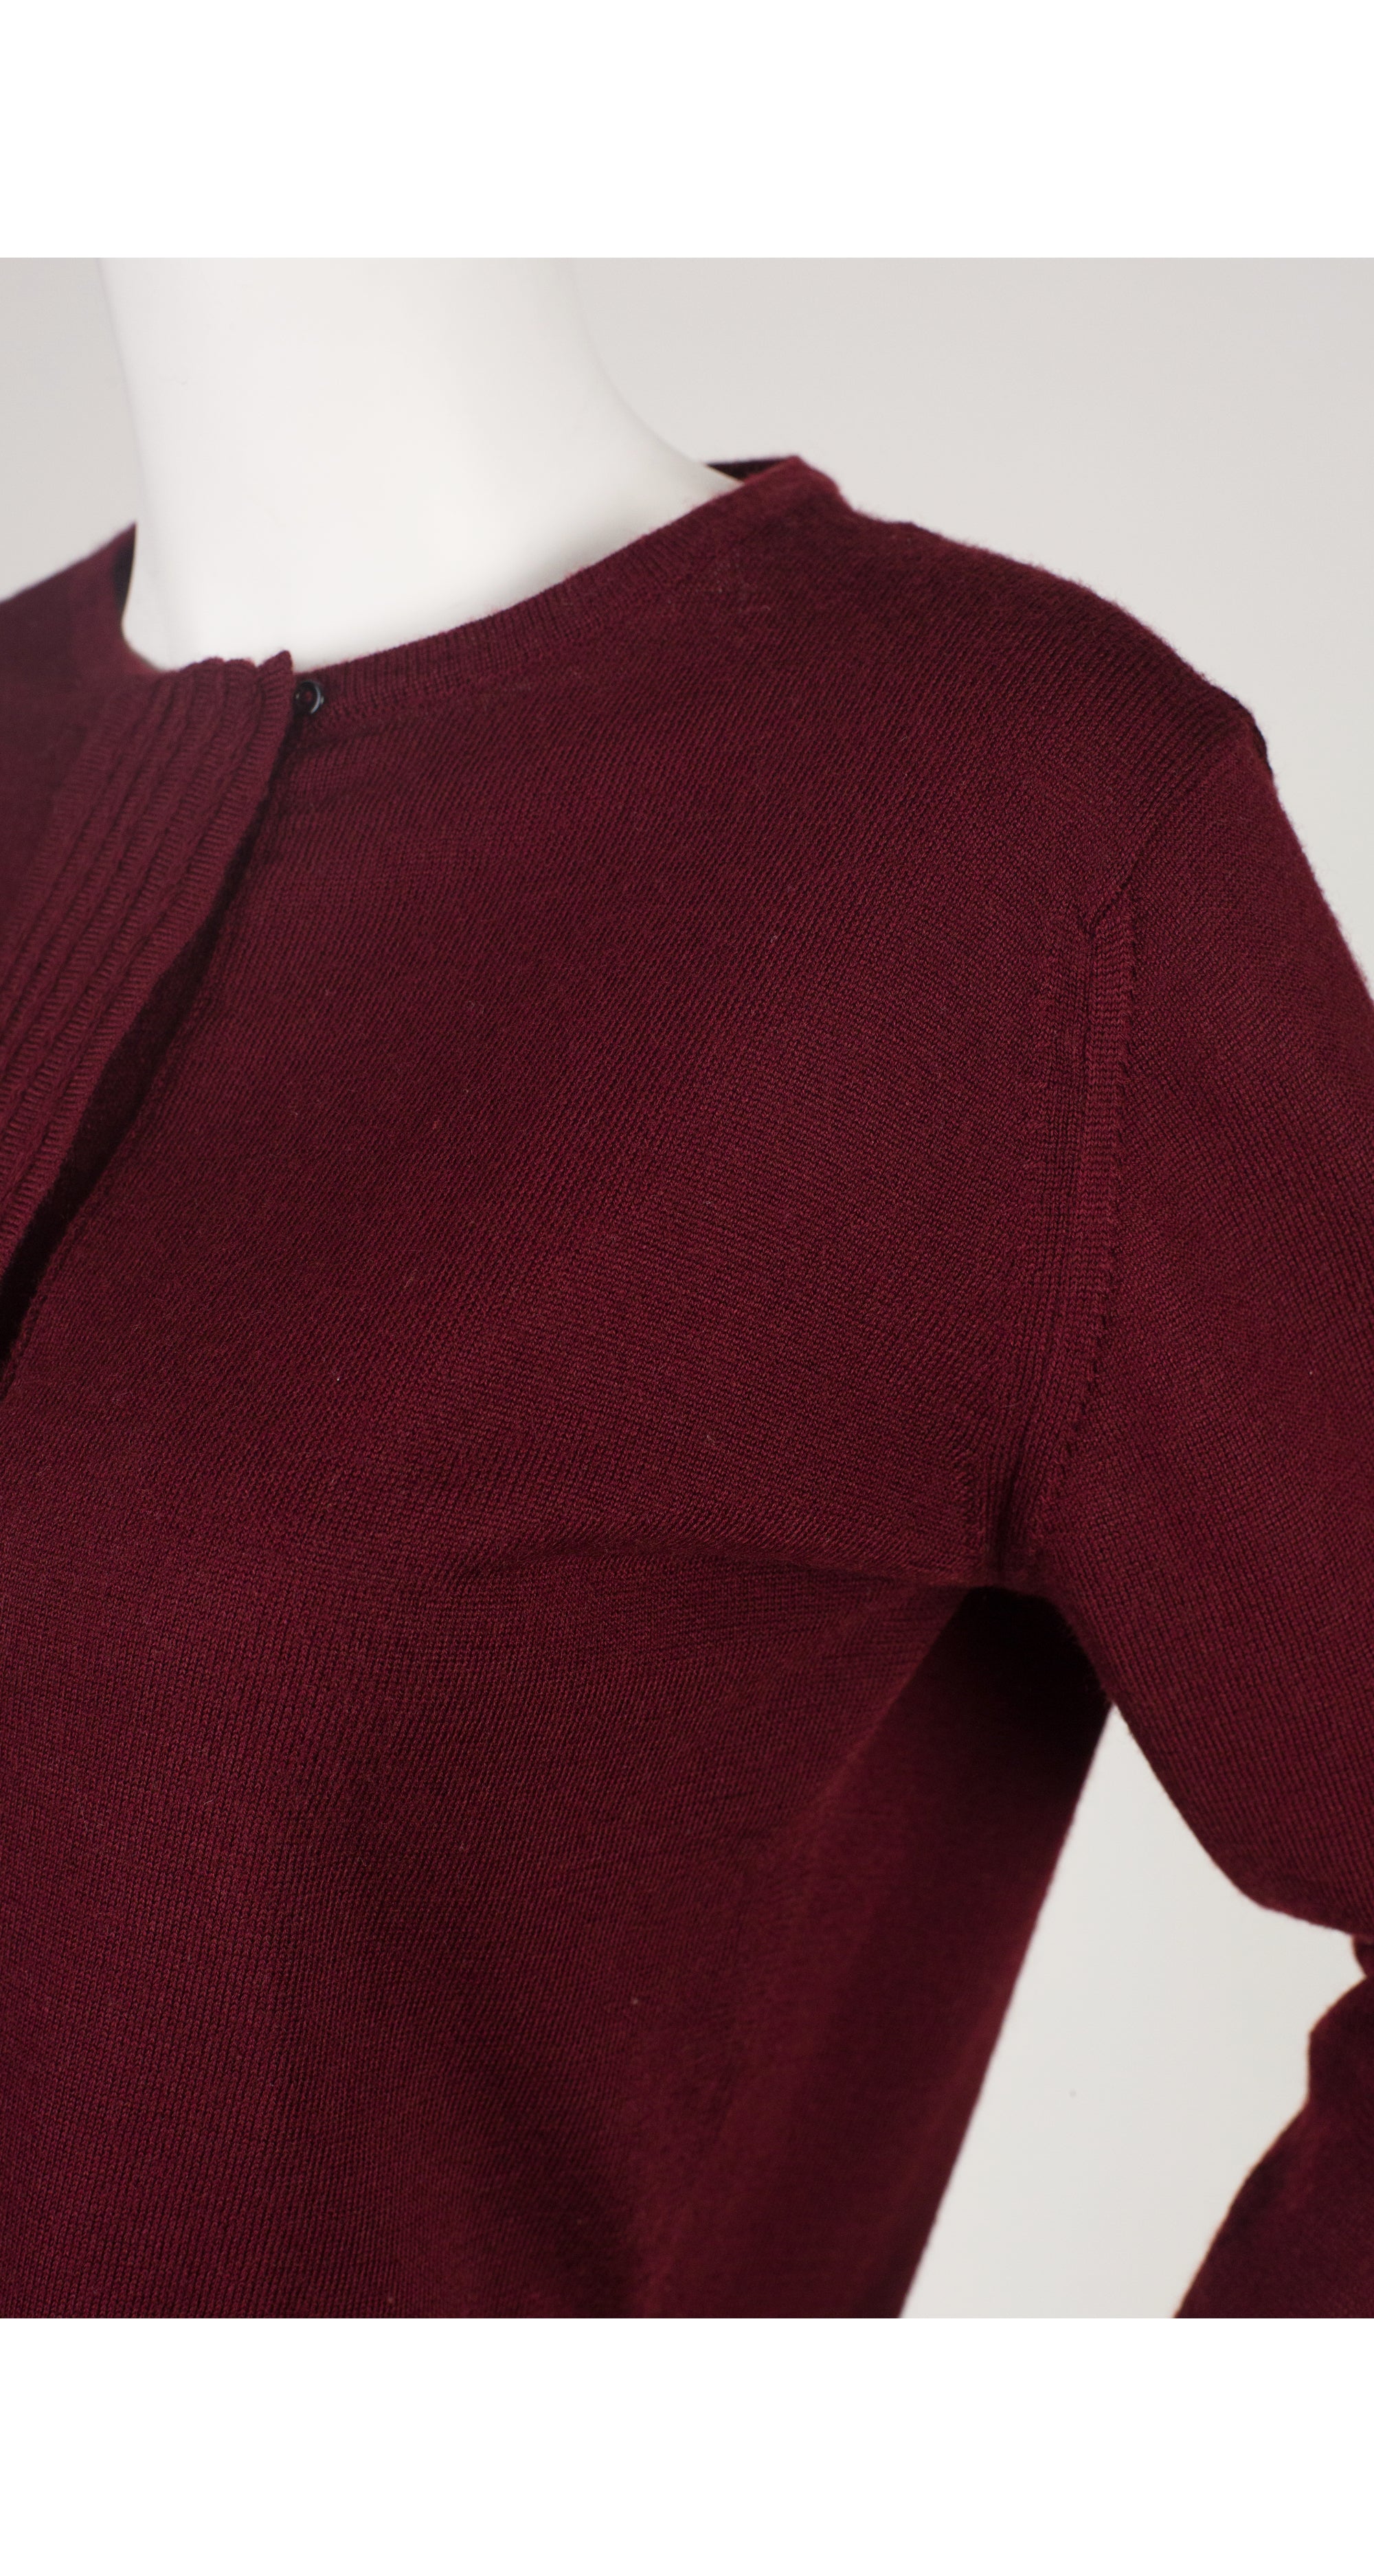 1960s Burgundy Button Up Knit Cardigan